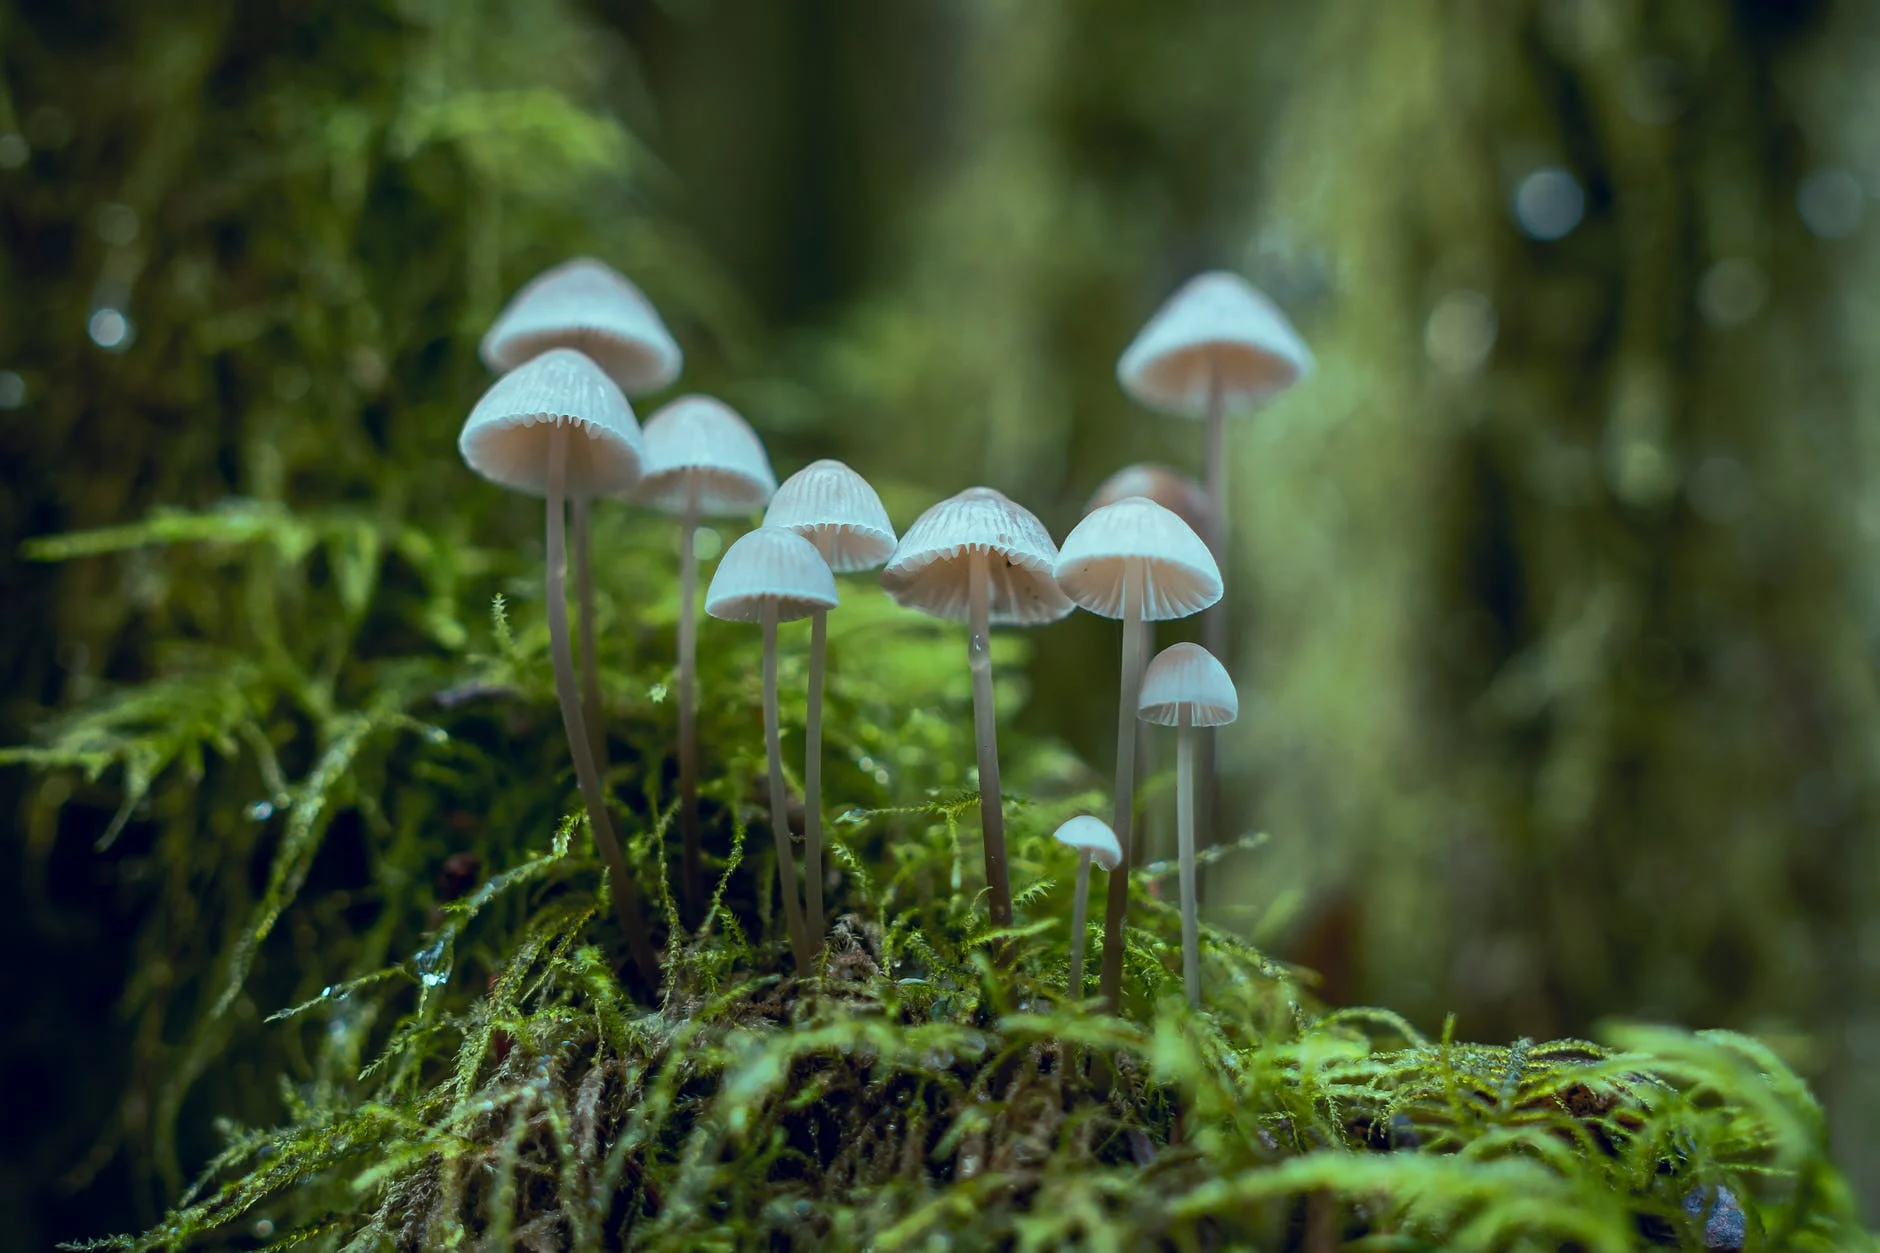 A picture containing tree, fungus, outdoor

Description automatically generated